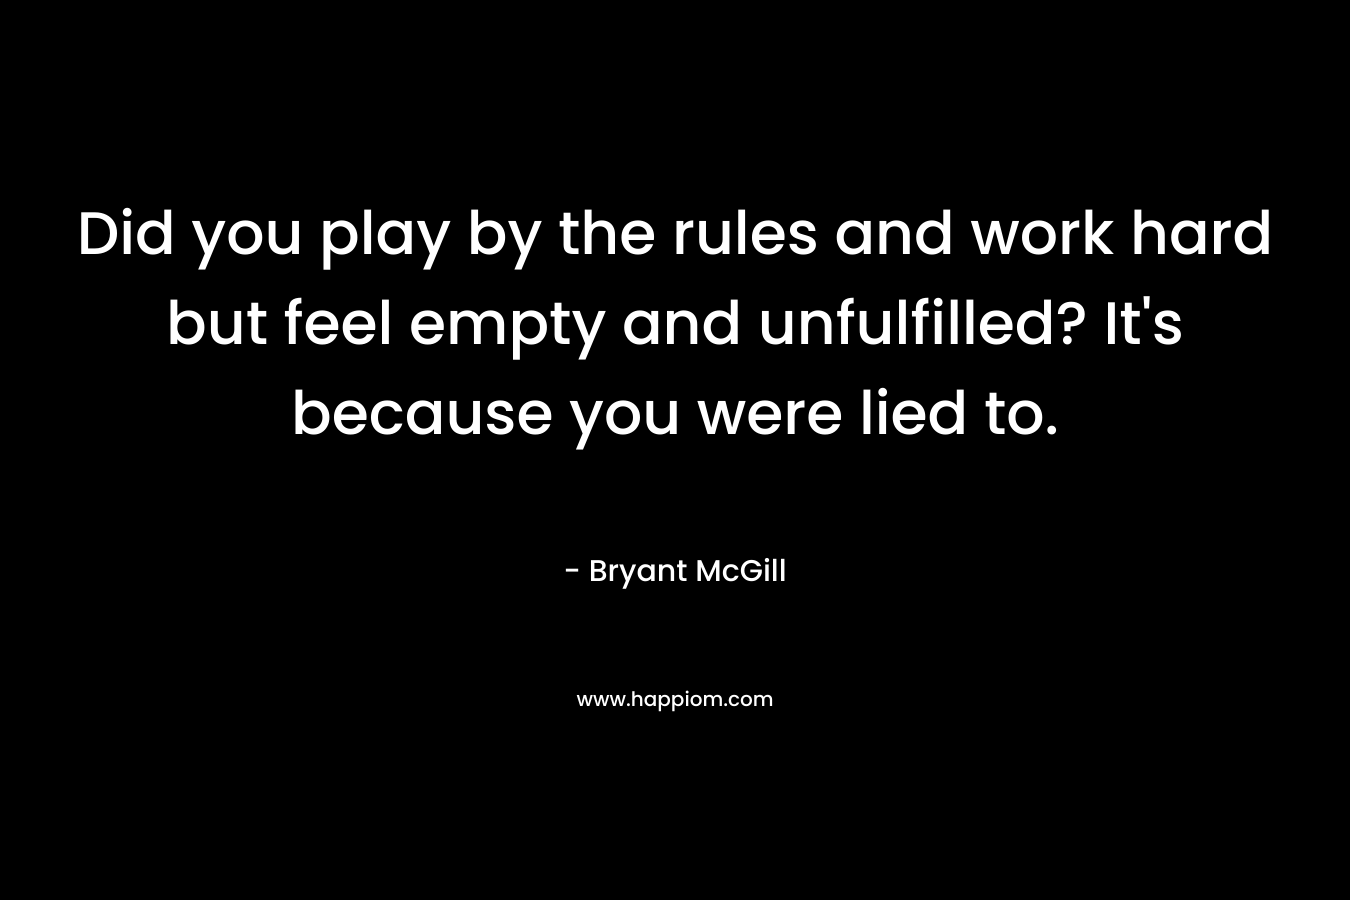 Did you play by the rules and work hard but feel empty and unfulfilled? It’s because you were lied to. – Bryant McGill